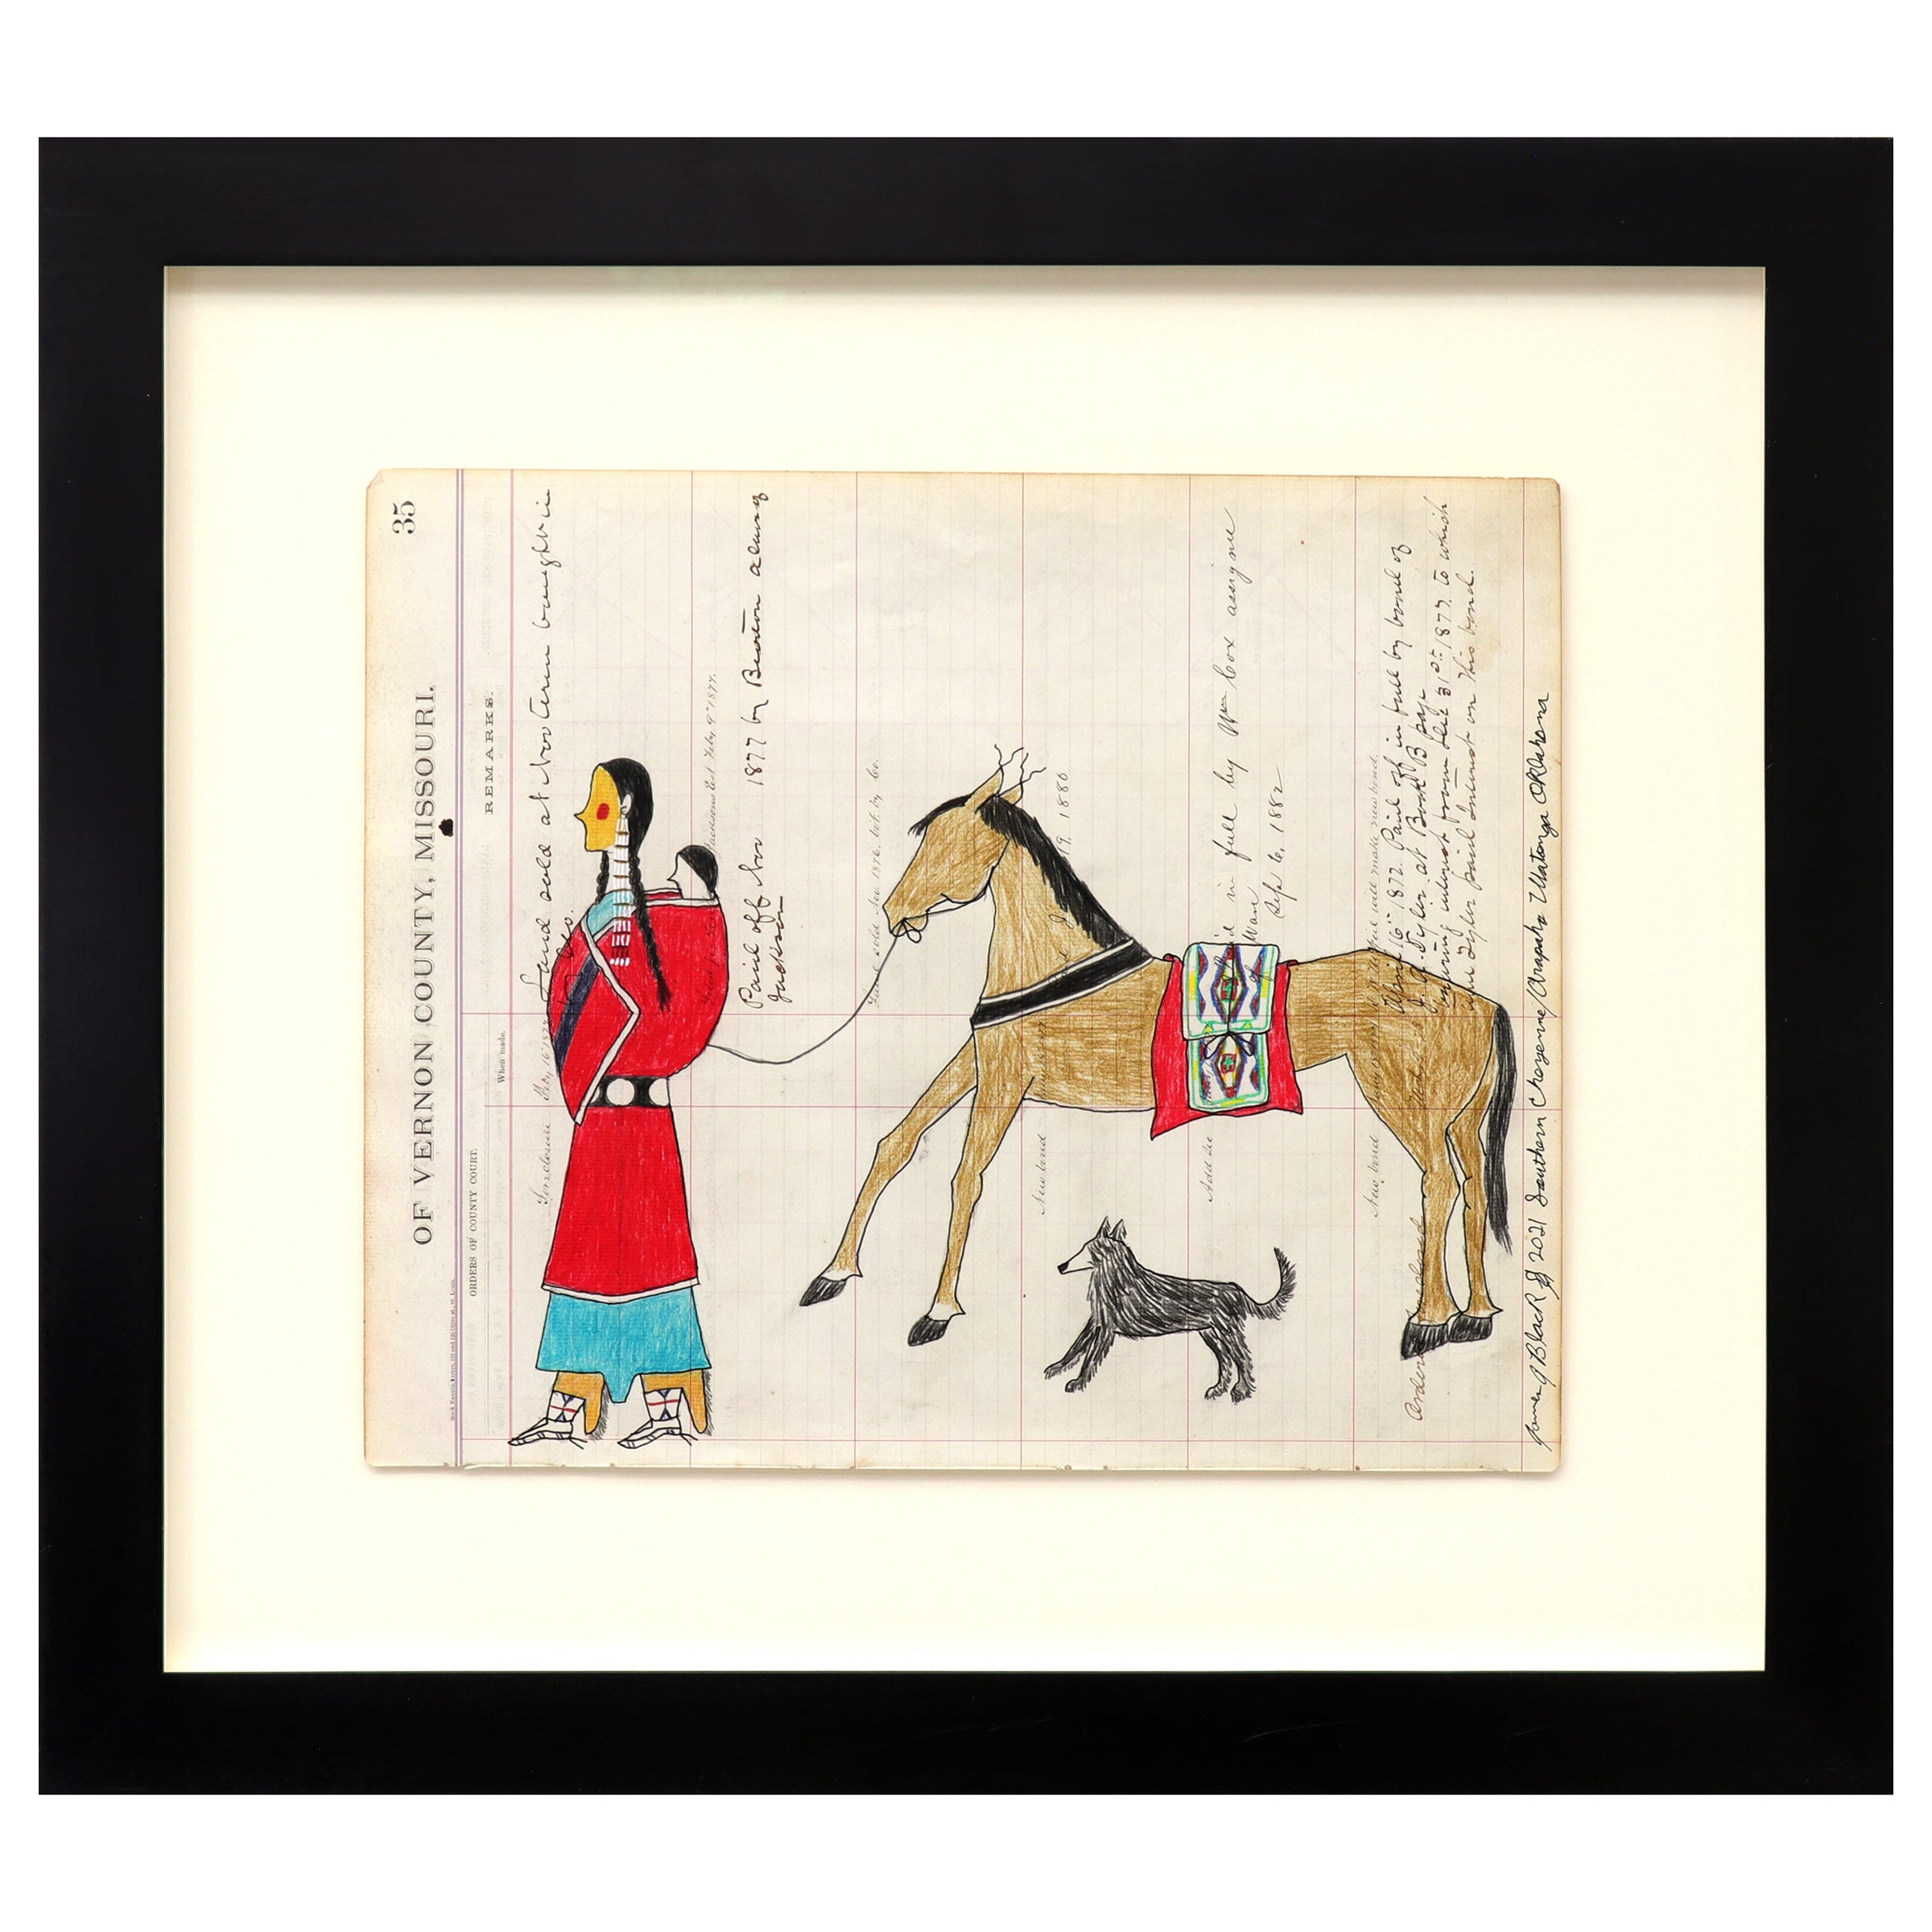 Cheyenne Woman with Baby, Horse, and Dog, Native American Ledger Art Drawing